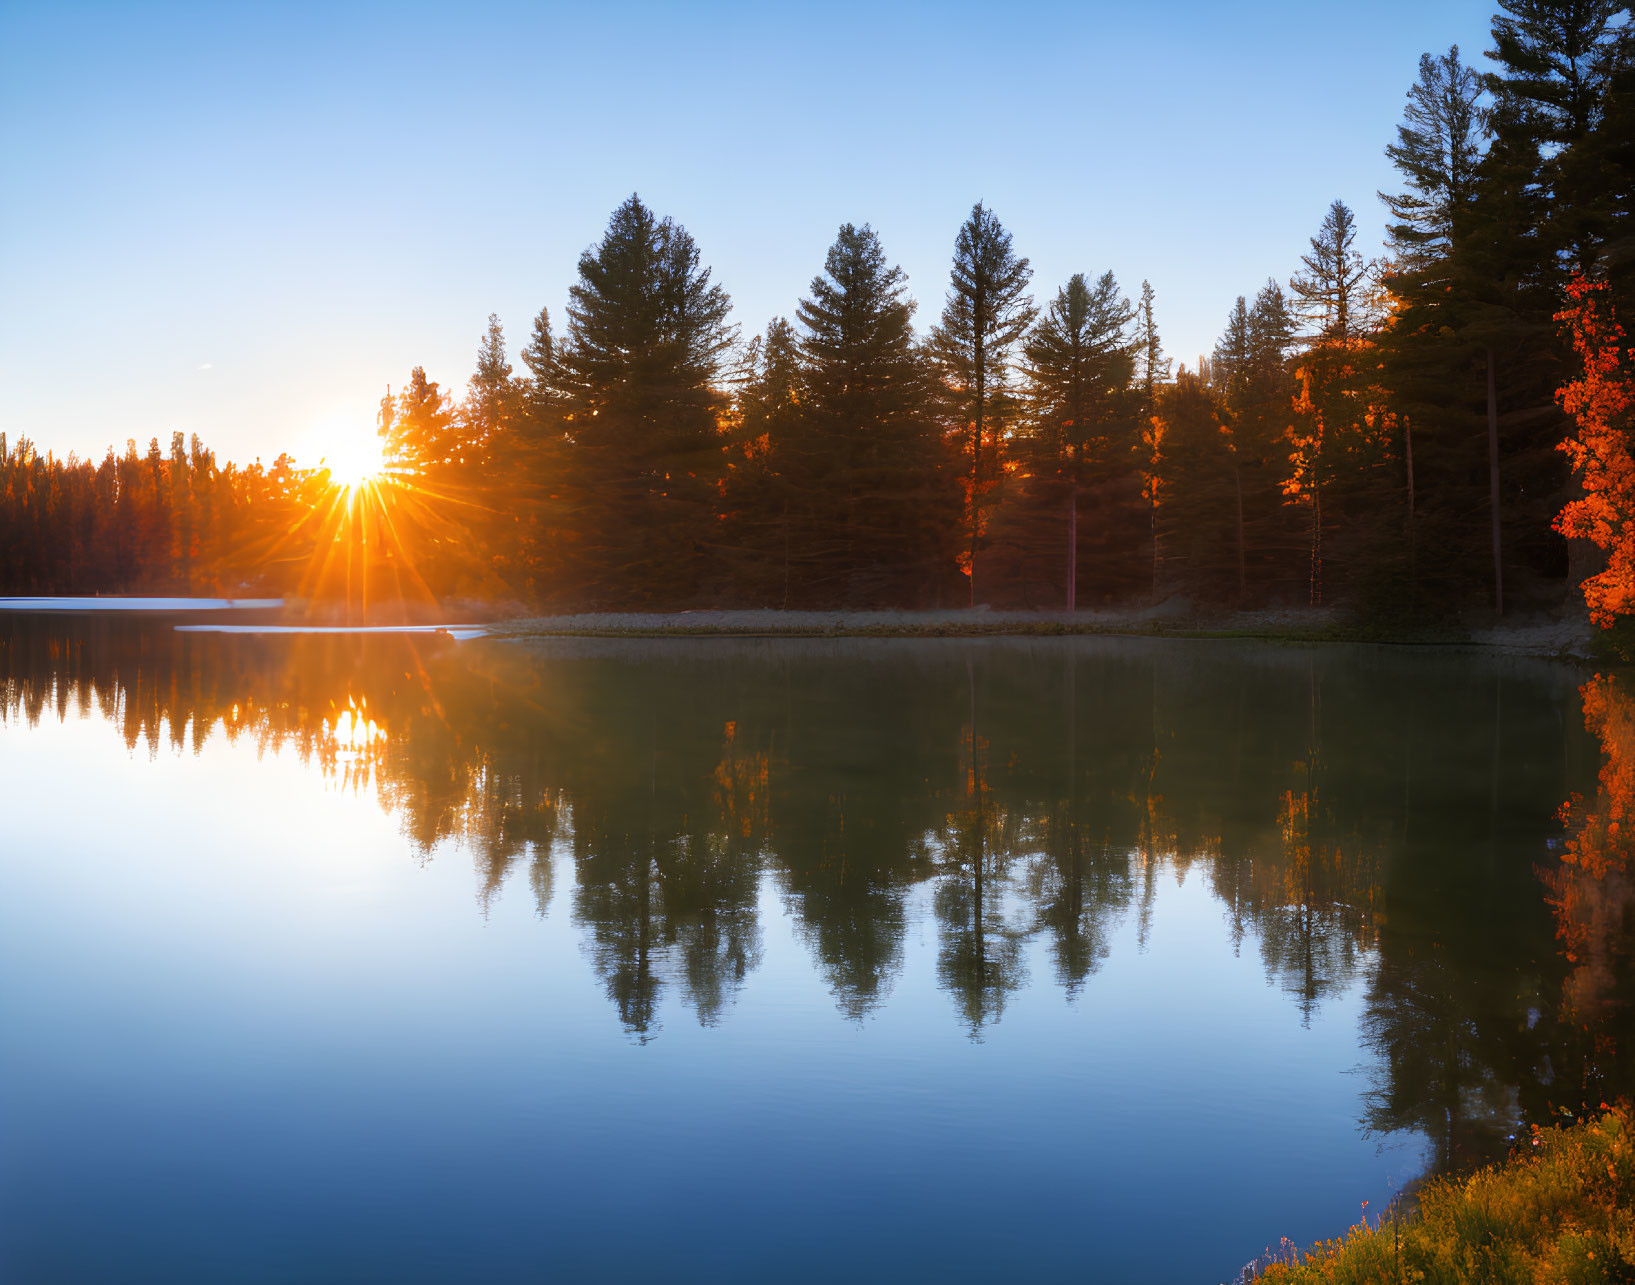 Tranquil lake sunset with pine tree reflection and autumn foliage.